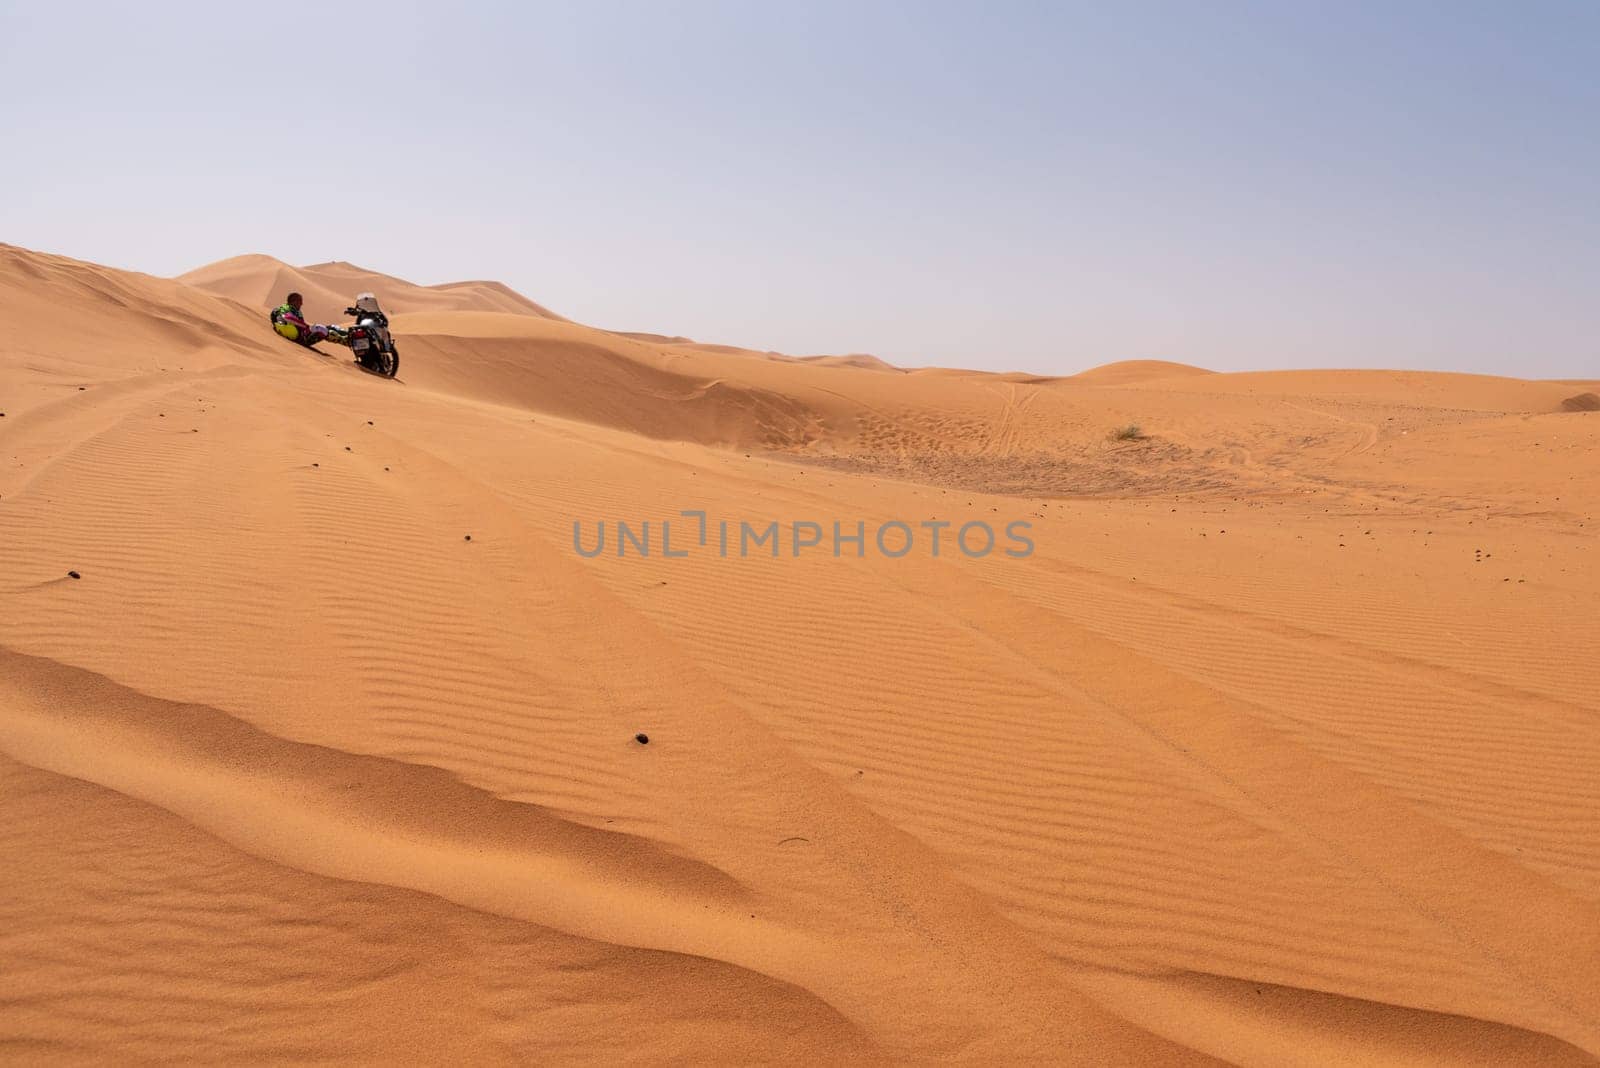 A motorbiker driving off-road in the Erg Chebbi desert became stuck in the sand, Morocco